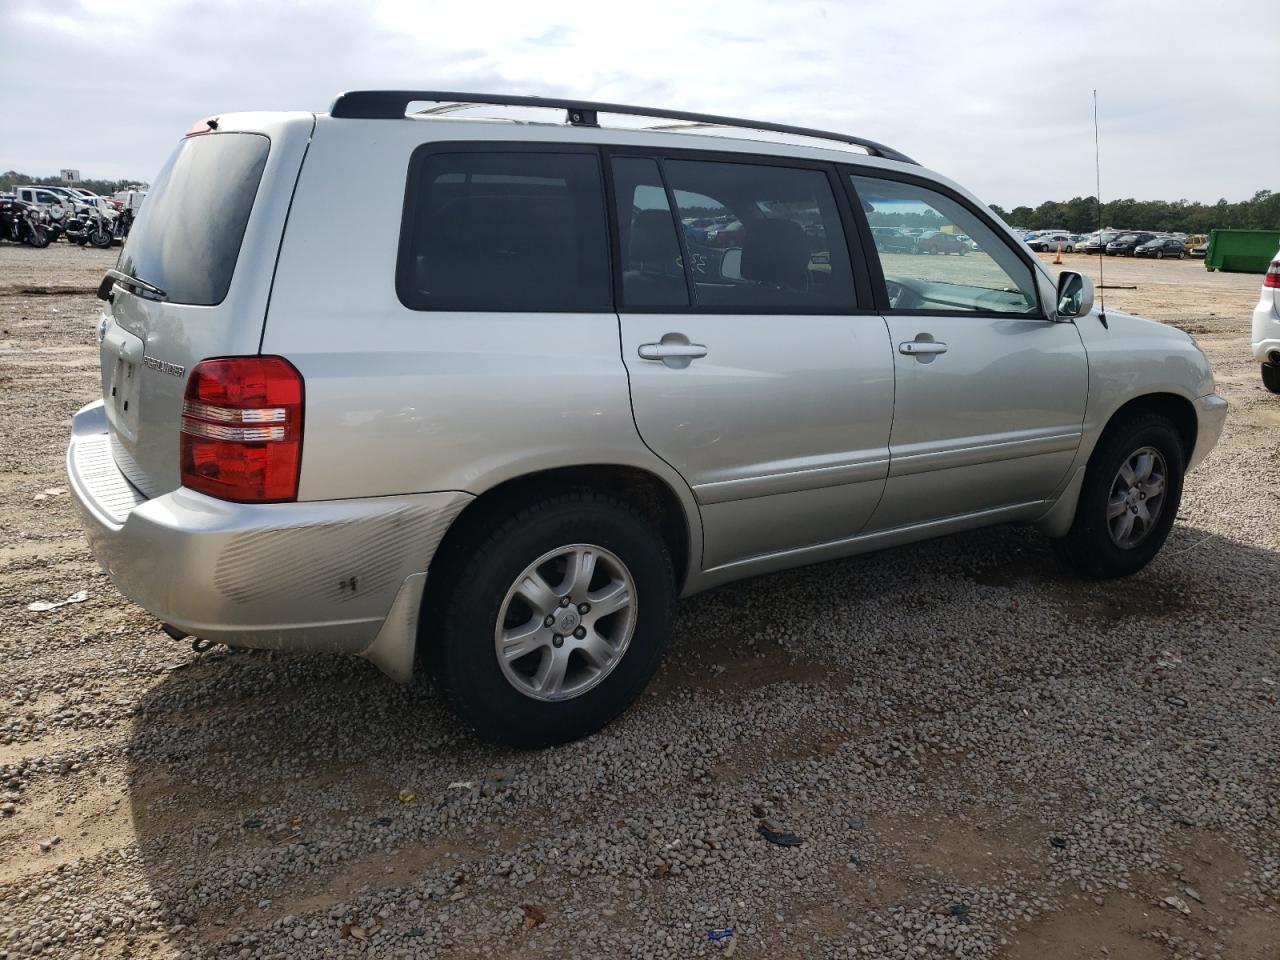 JTEGF21A130****** Salvage and Repairable 2003 Toyota Highlander in AL - Theodore